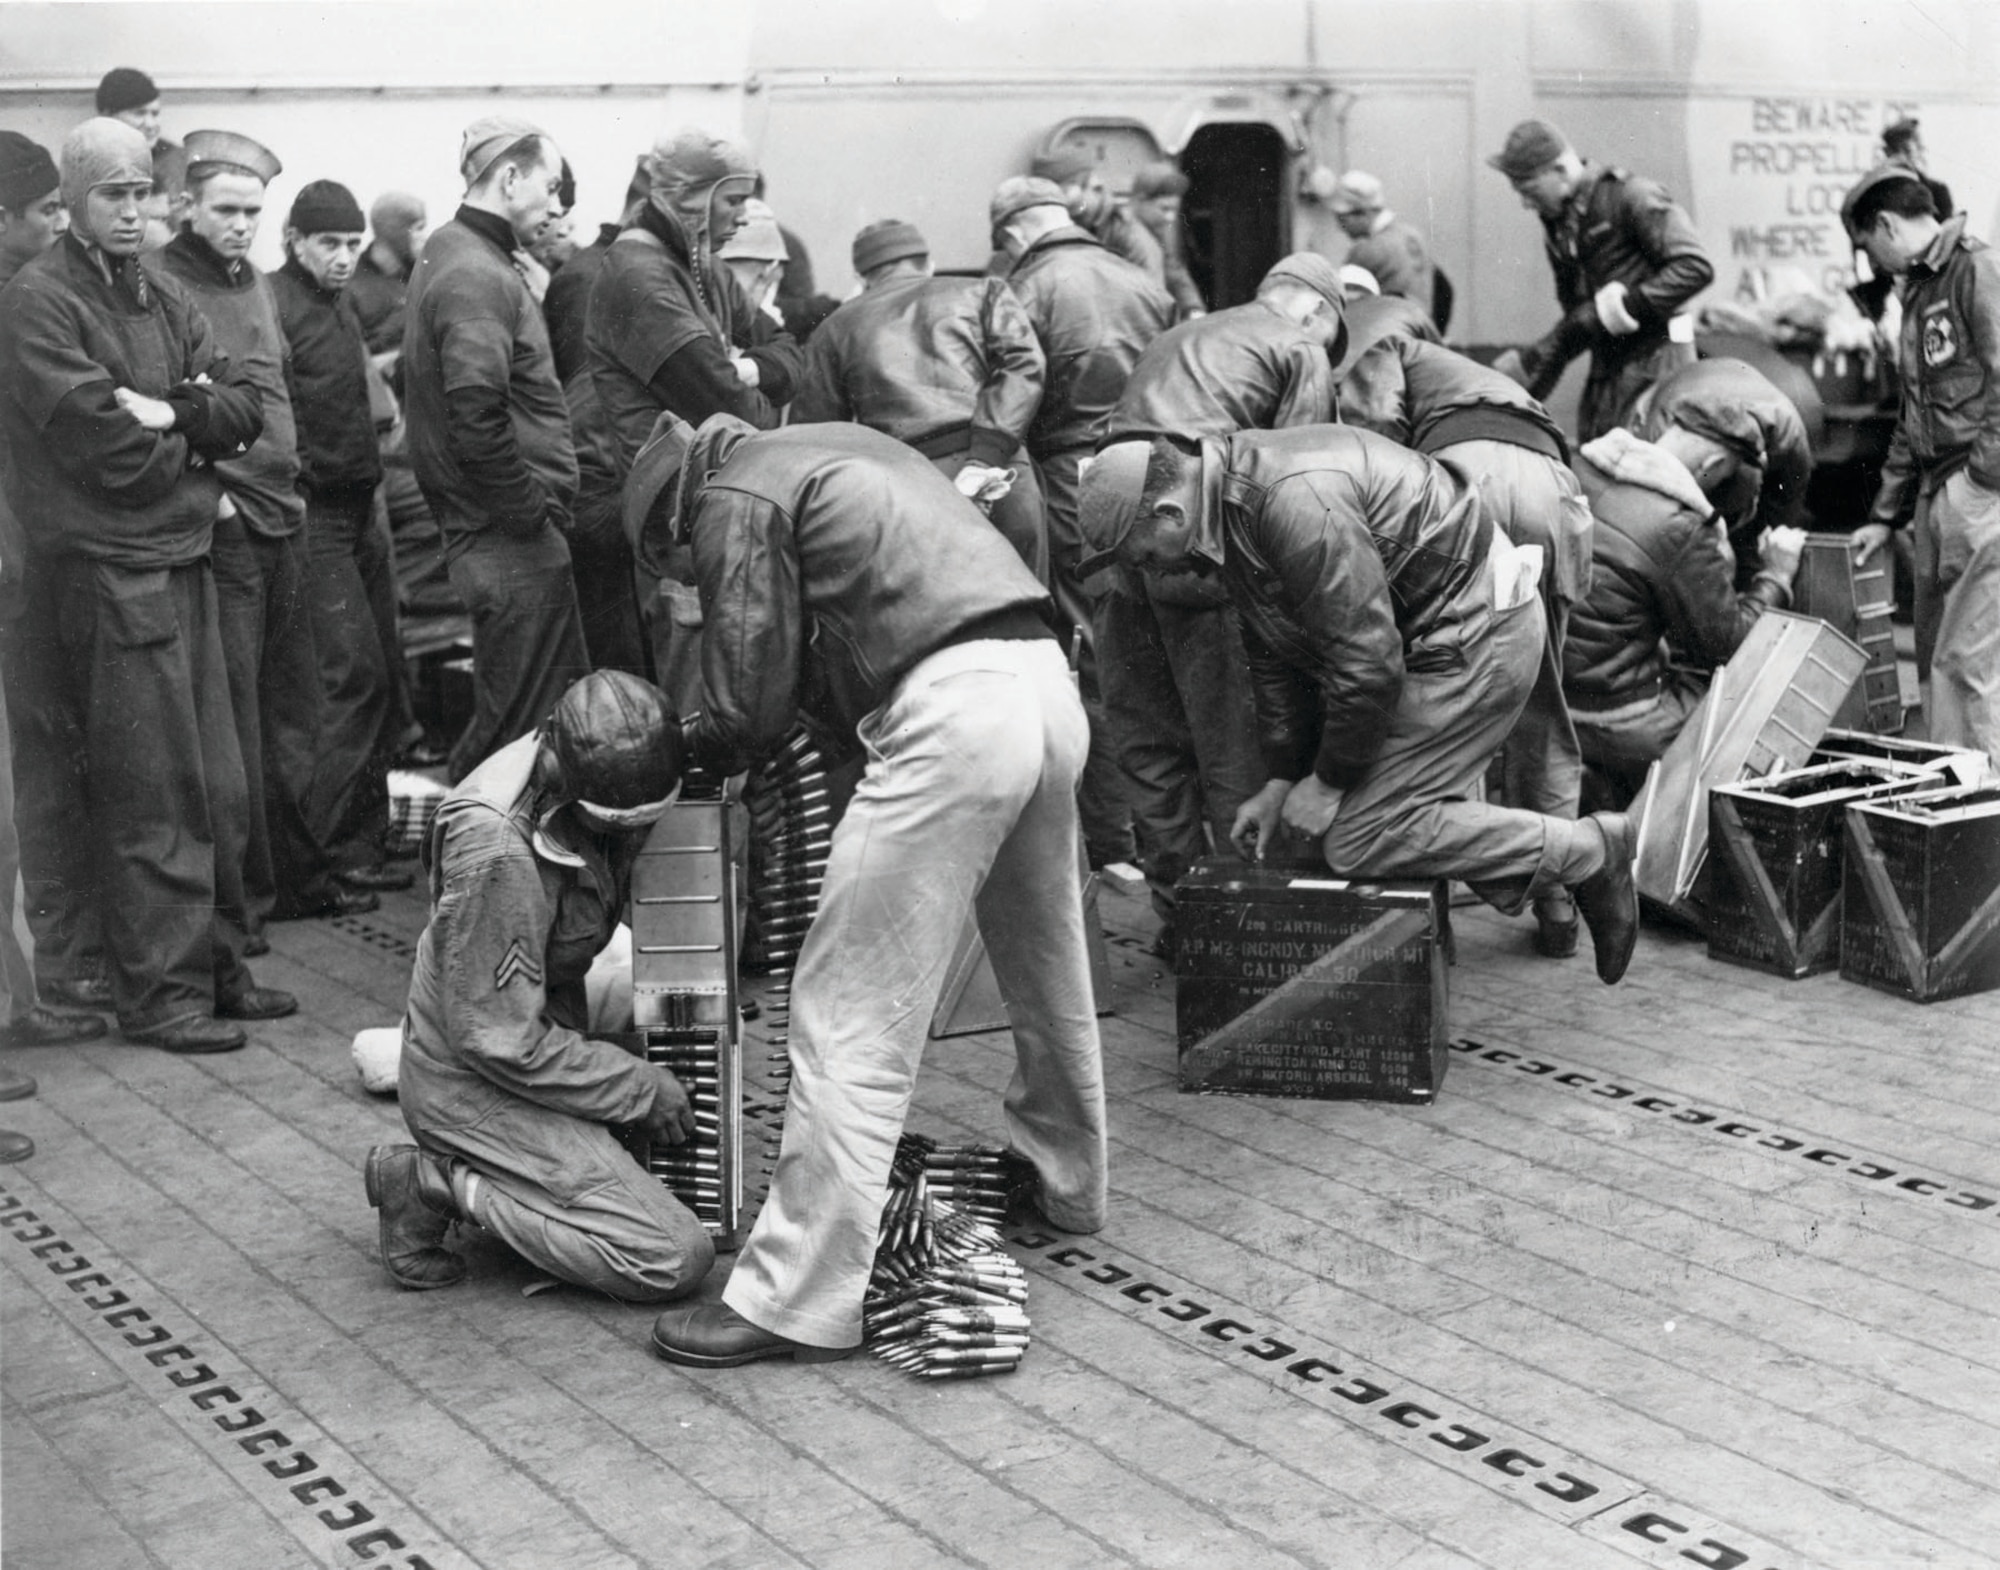 USAAF personnel load .50-cal. ammunition into ammo trays prior to takeoff from the Hornet as Navy personnel watch. (U.S. Air Force photo)